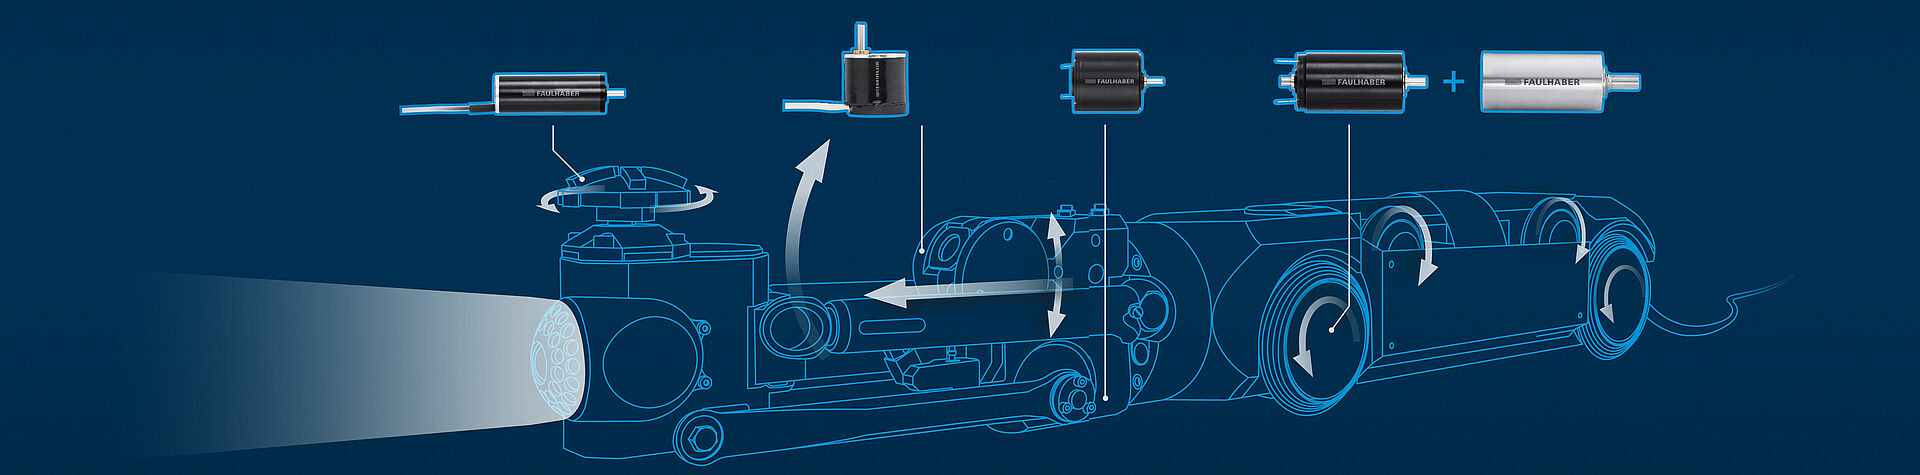 DC-Motors from FAULHABER are used for camera control, tool functions and the wheel drive